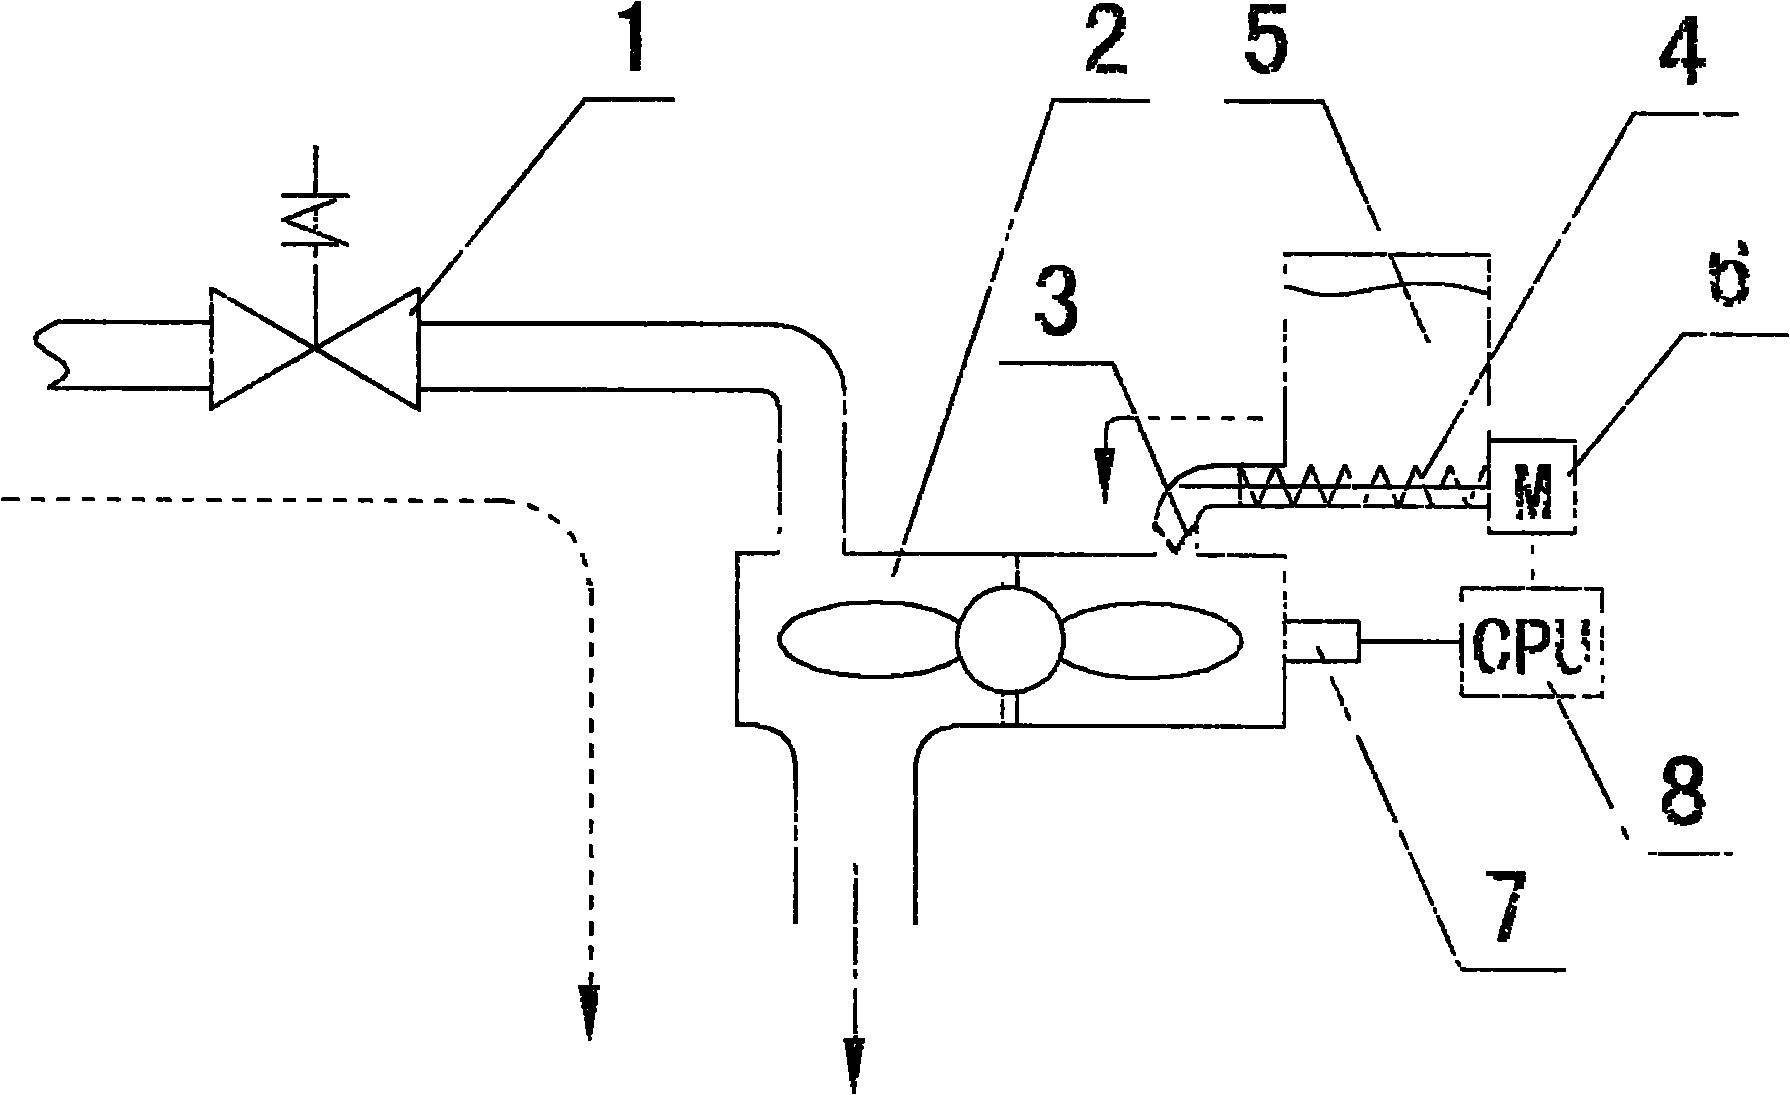 Detergent pouring and mixing device